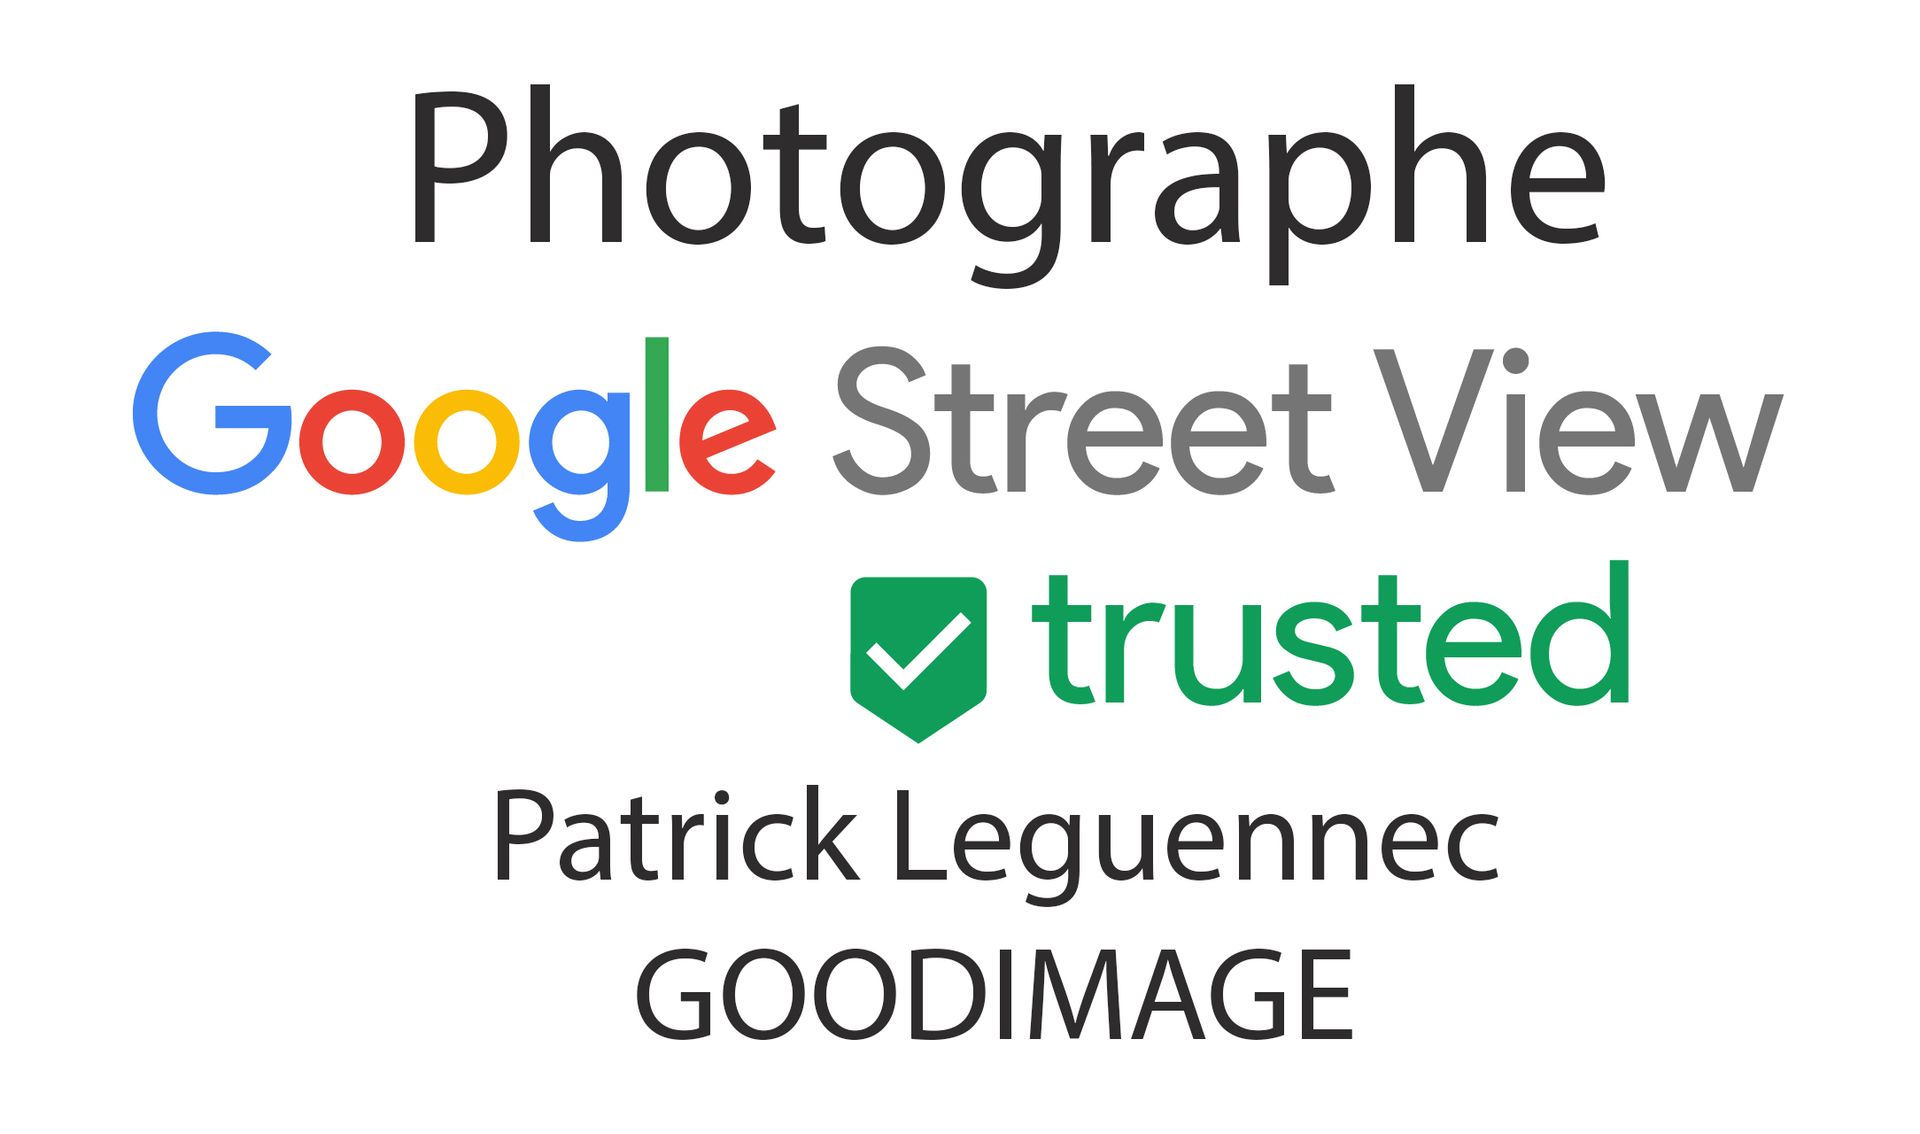 CERTIFIED GOOGLE TRUSTED PHOTOGRAPHER PATRICK LEGUENNEC